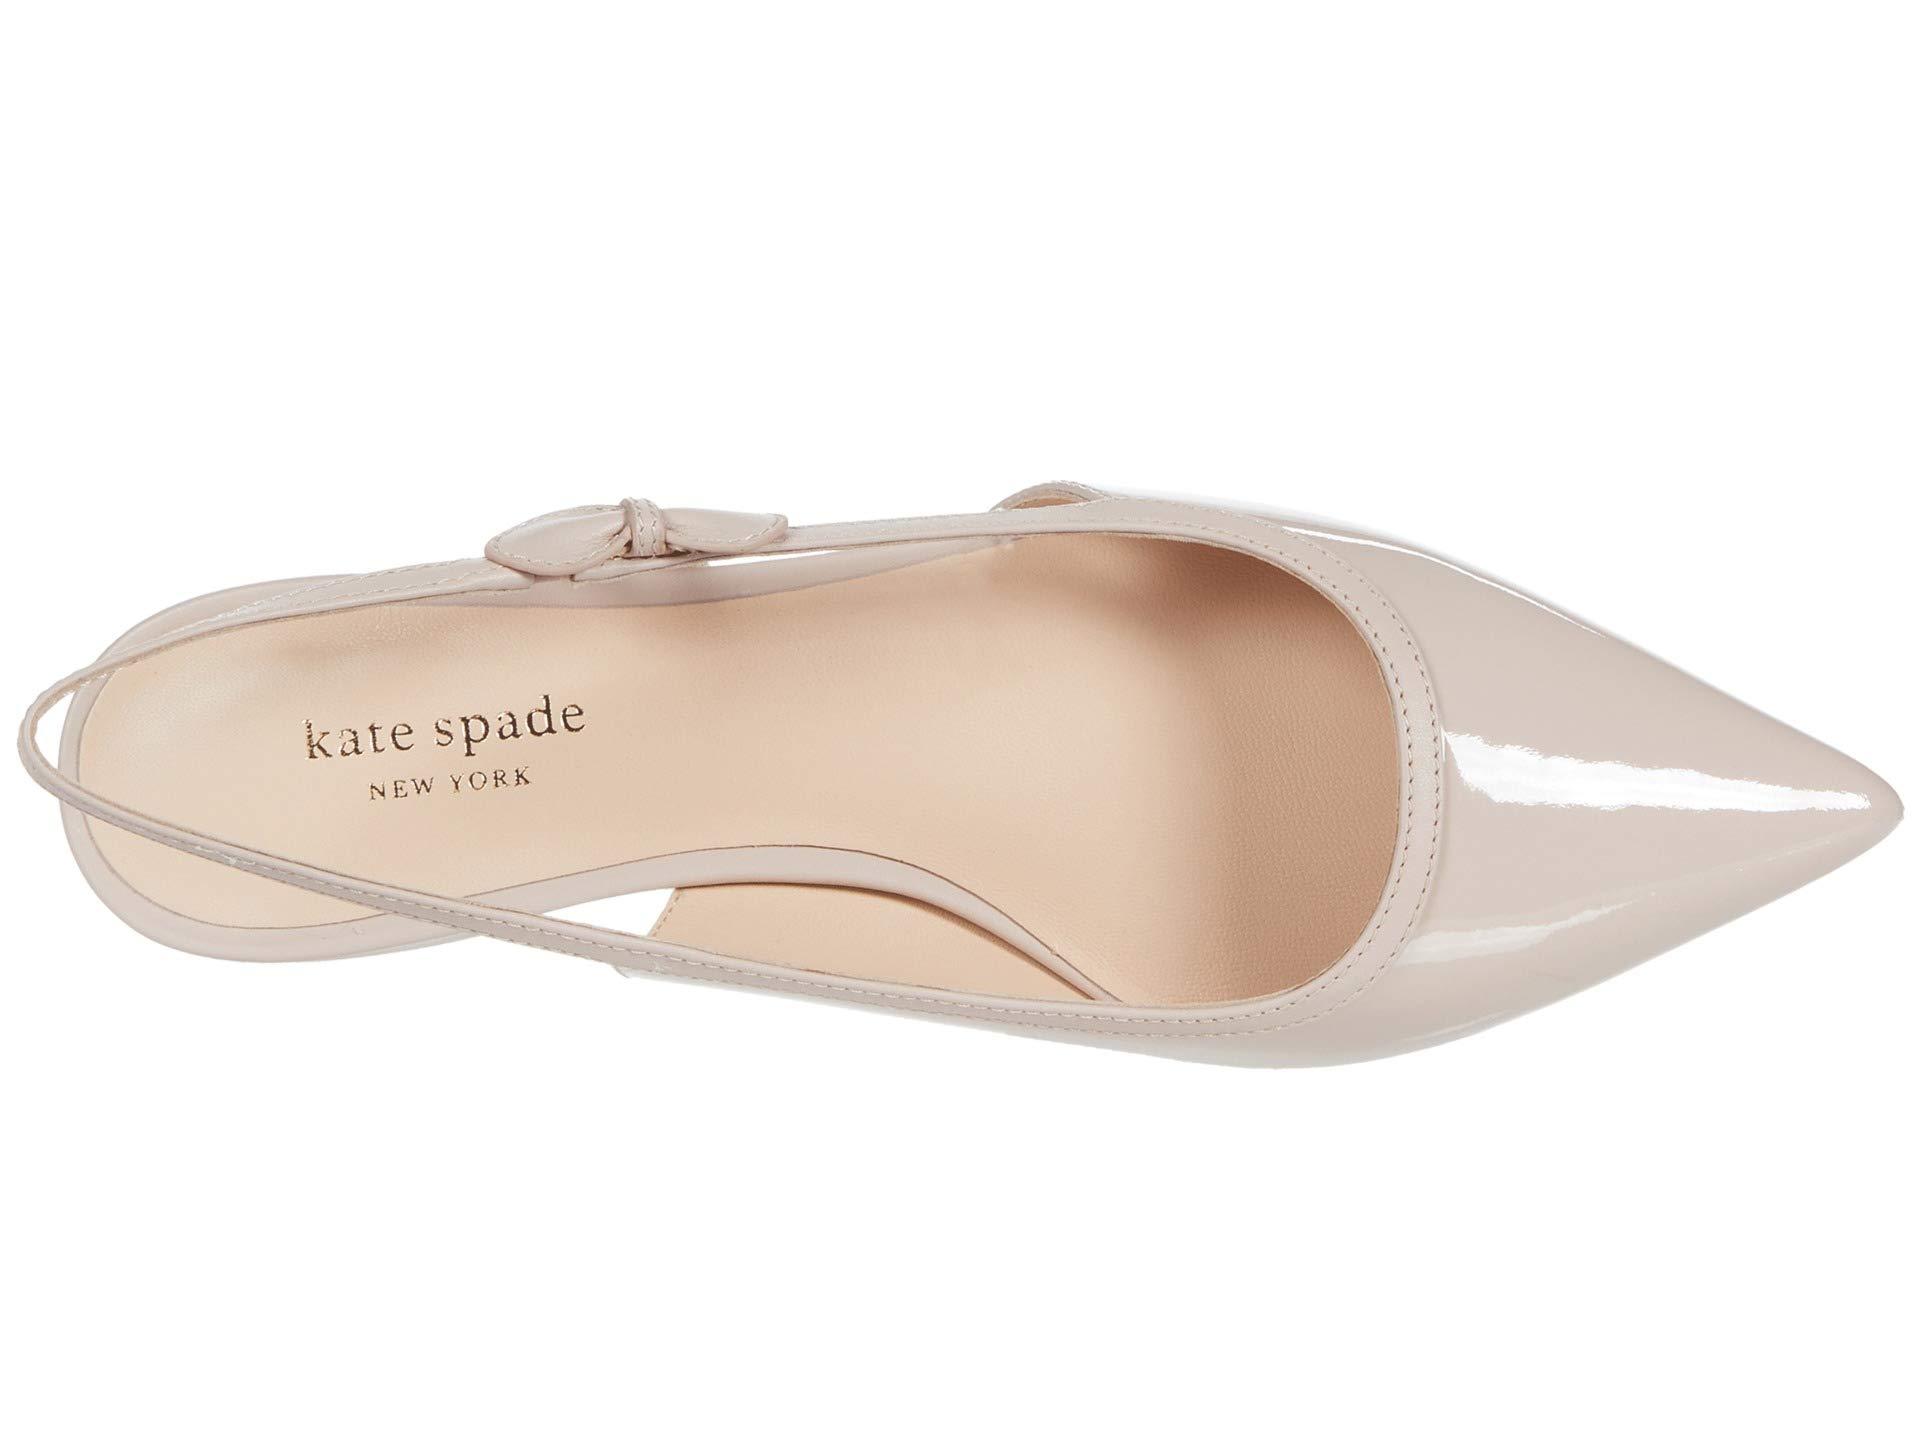 Top 60+ imagen kate spade ballet flats with bow - Thptnganamst.edu.vn